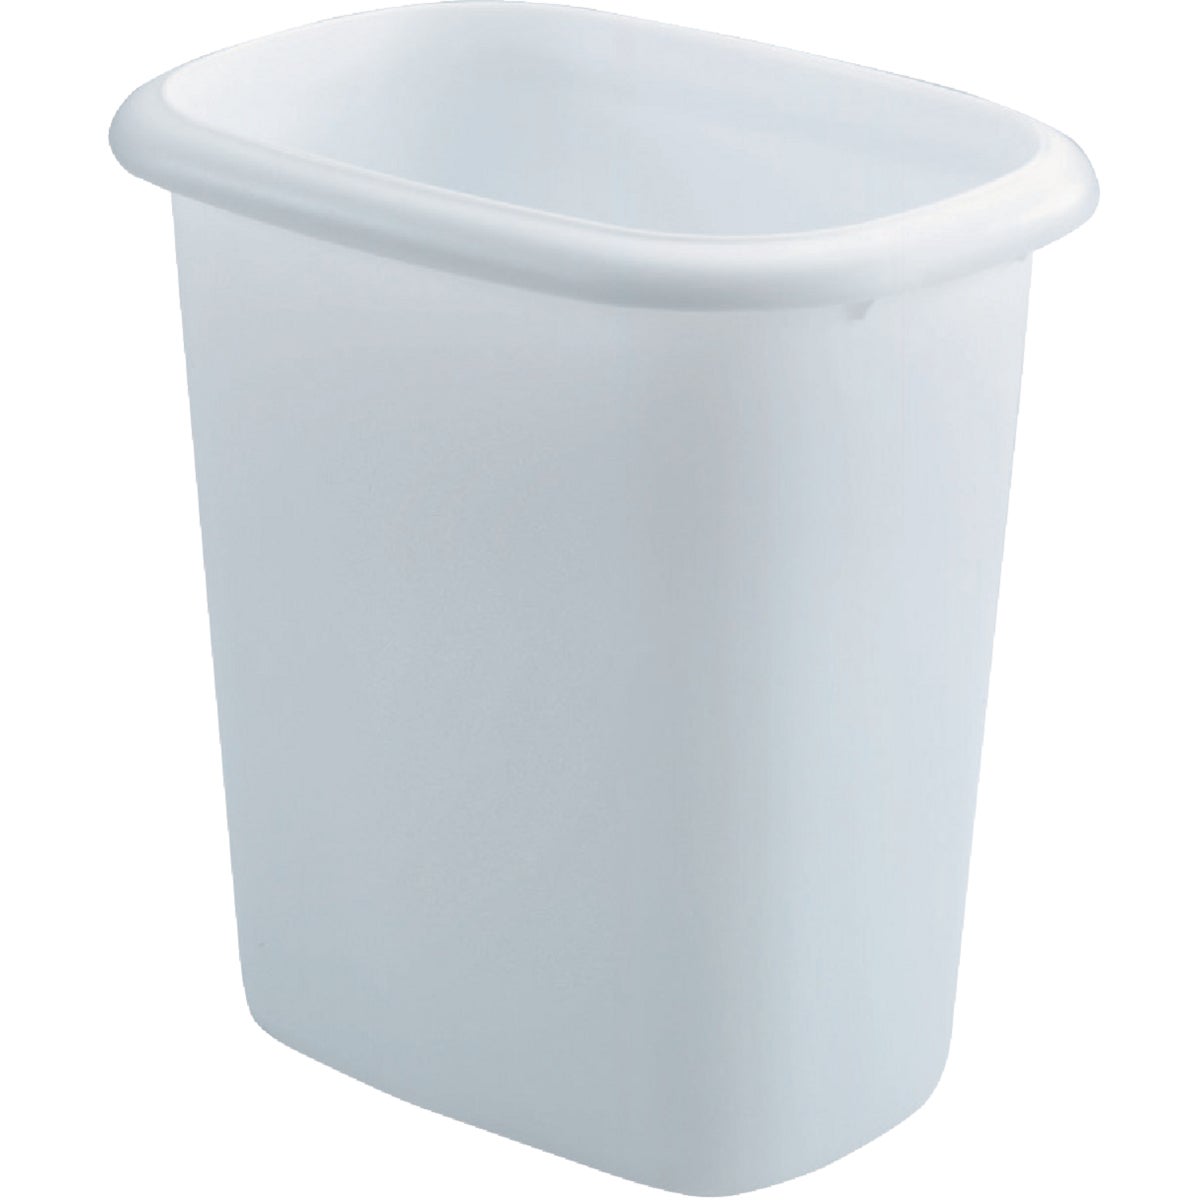 Item 621145, Textured exterior with a polished rim. 1.5 Gallon capacity.